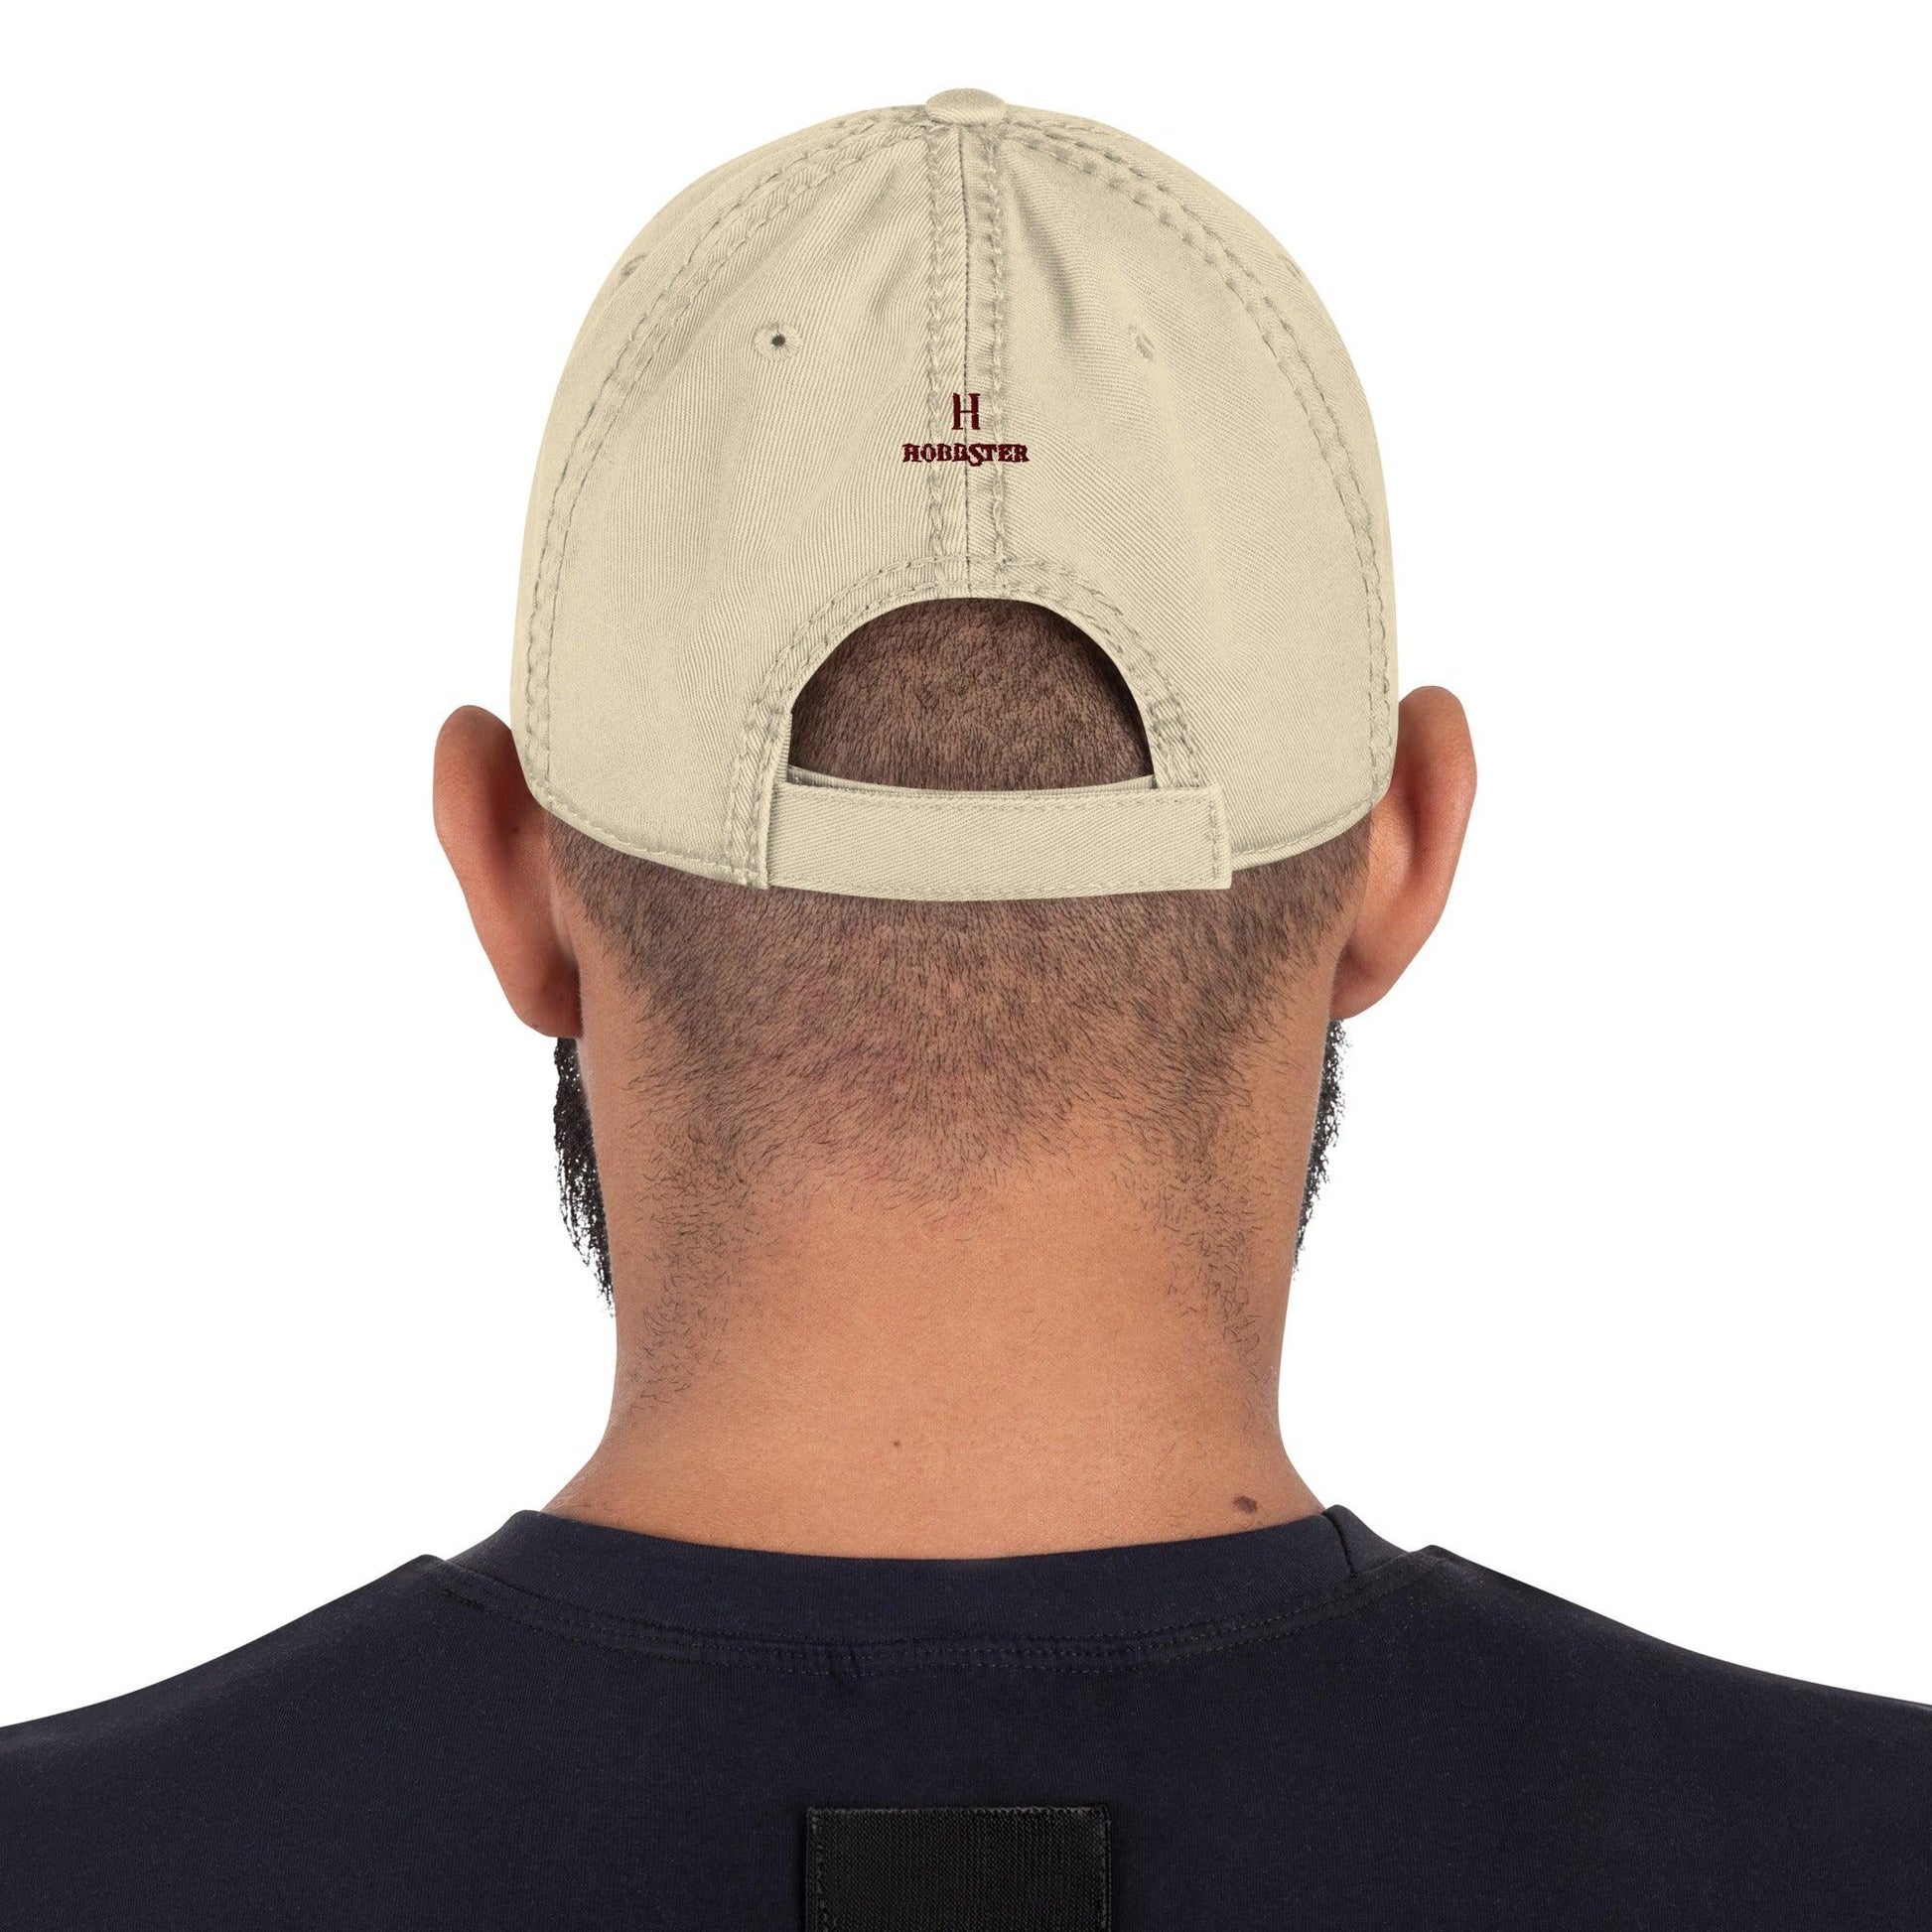 Distressed Dad Hat with Embroidered Labrador Logo - Hobbster